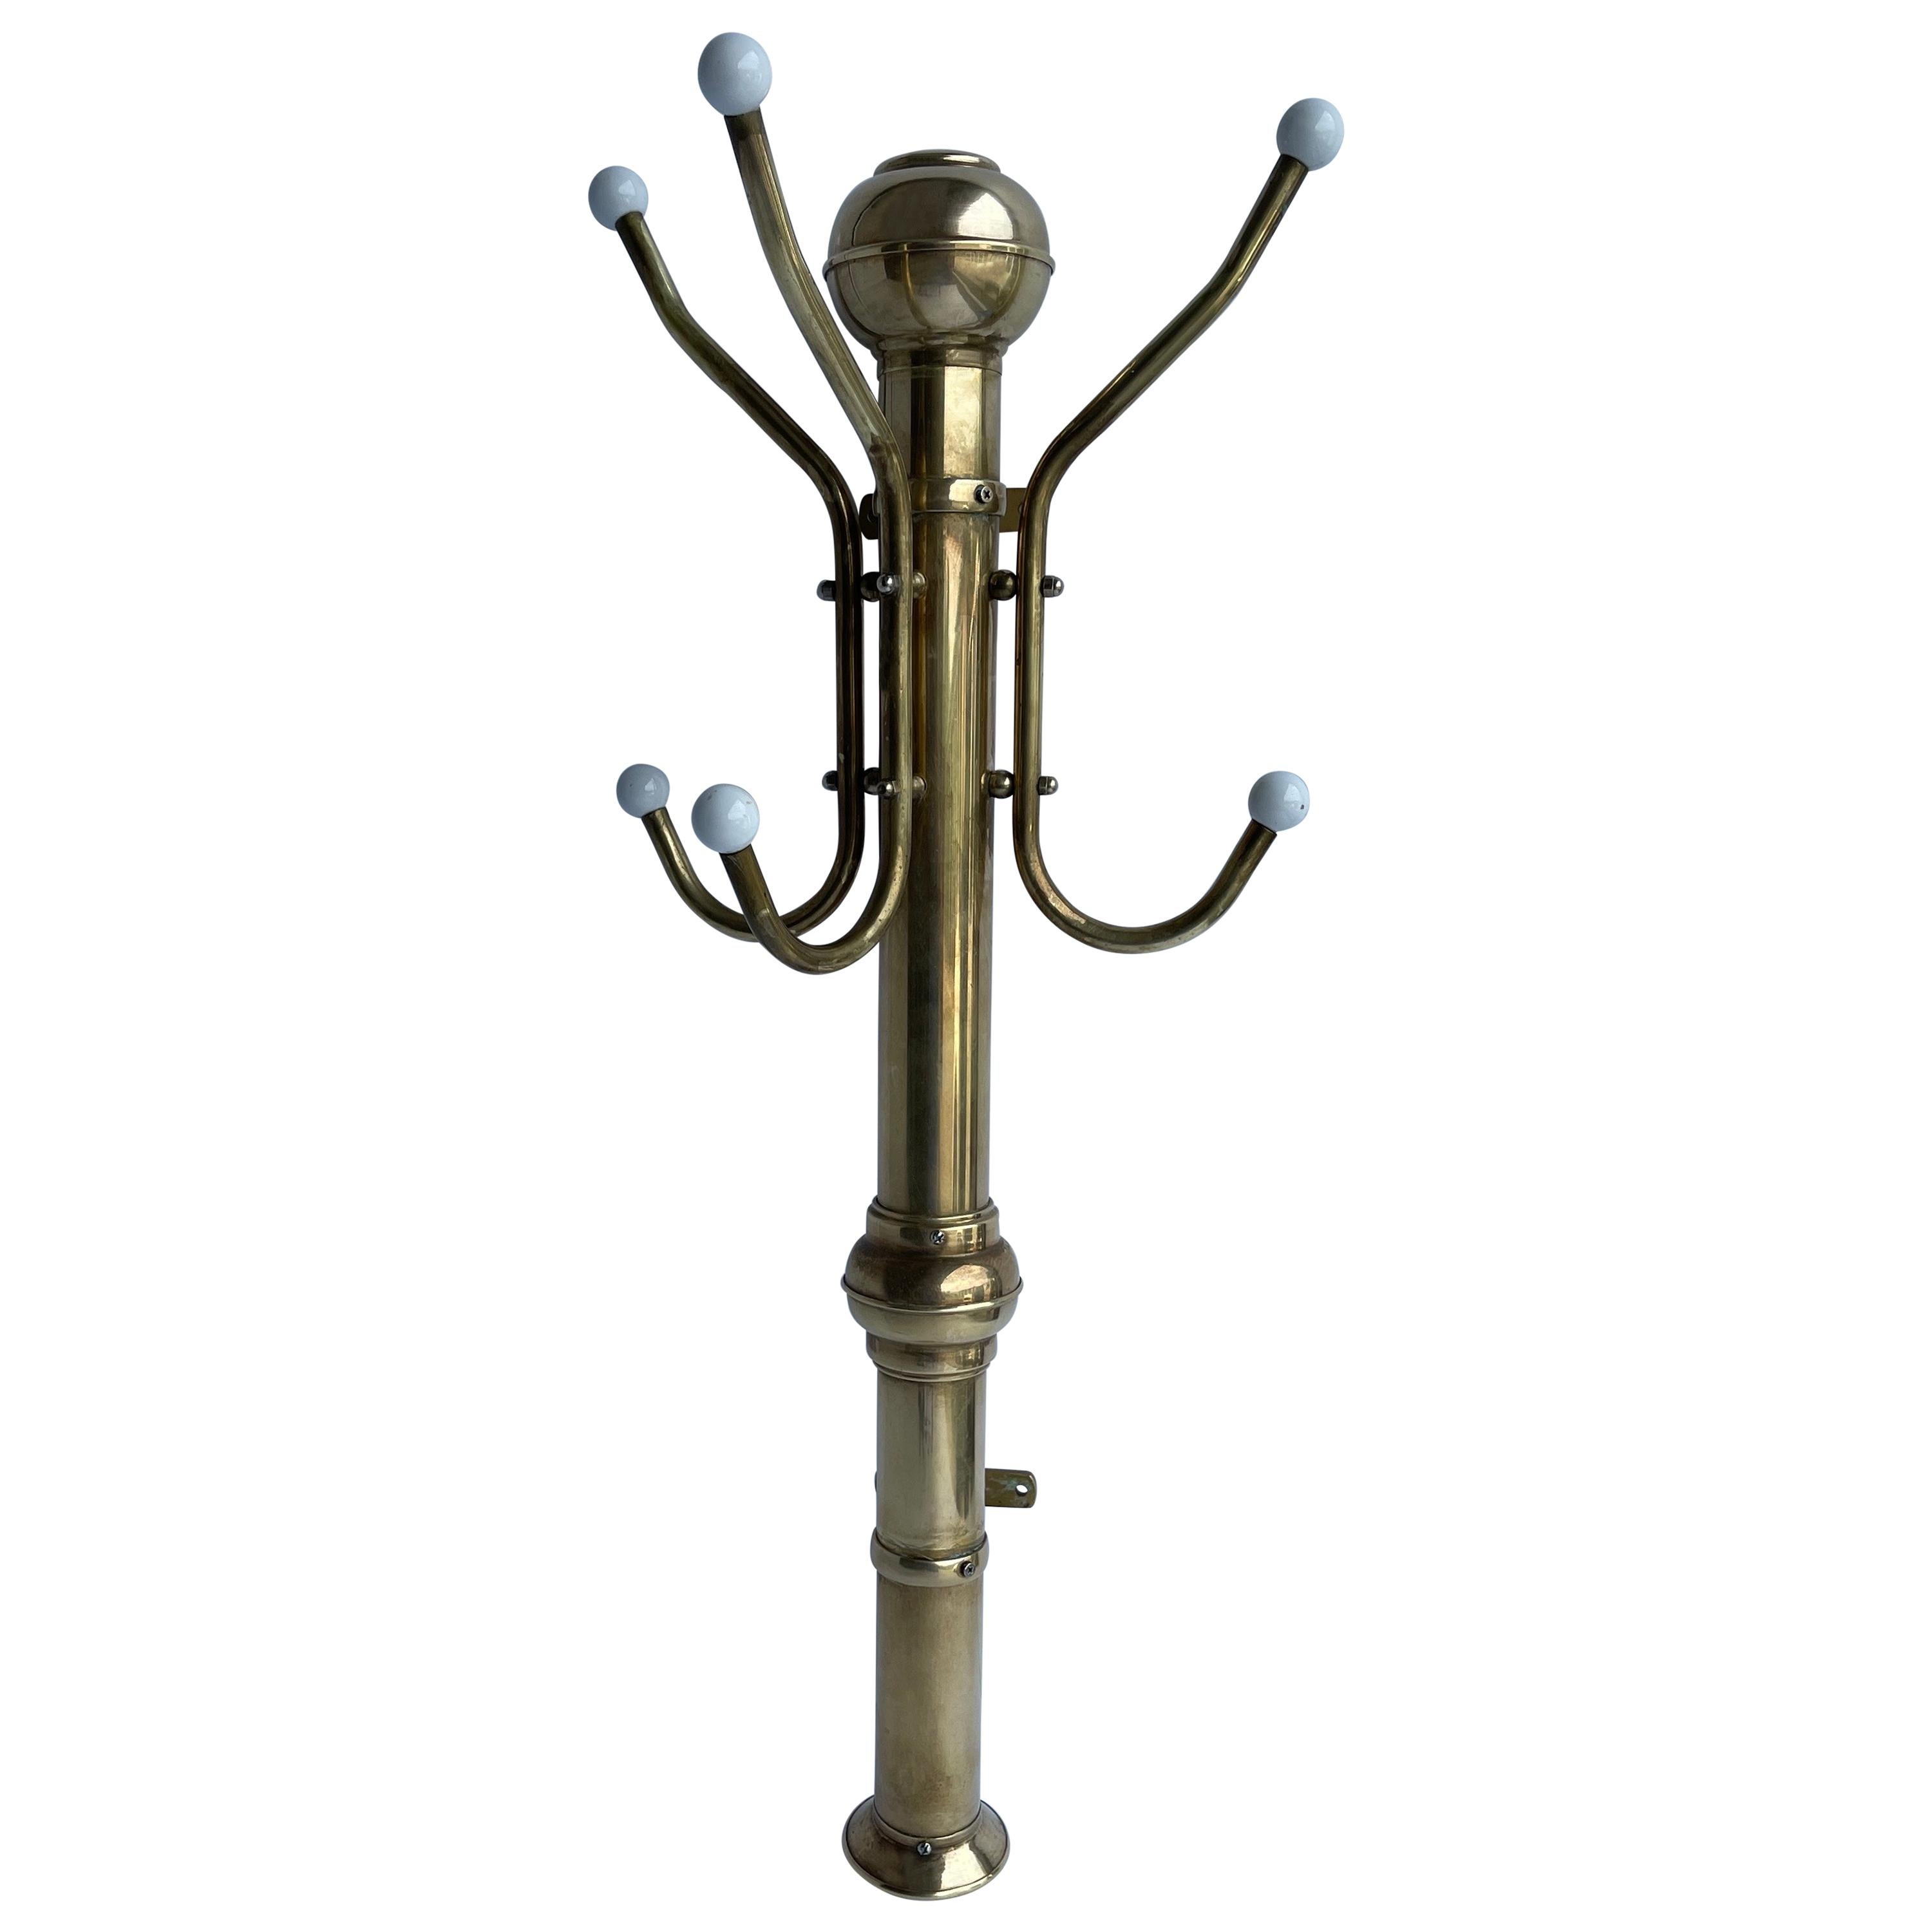 Early 1900's brass and Porcelain coat and hat wall mounted rack.
This sturdy coat and hat rack is a wonderful example of vintage design functionality. These racks were common in a variety of venues. They are sturdy, functional and classic. The